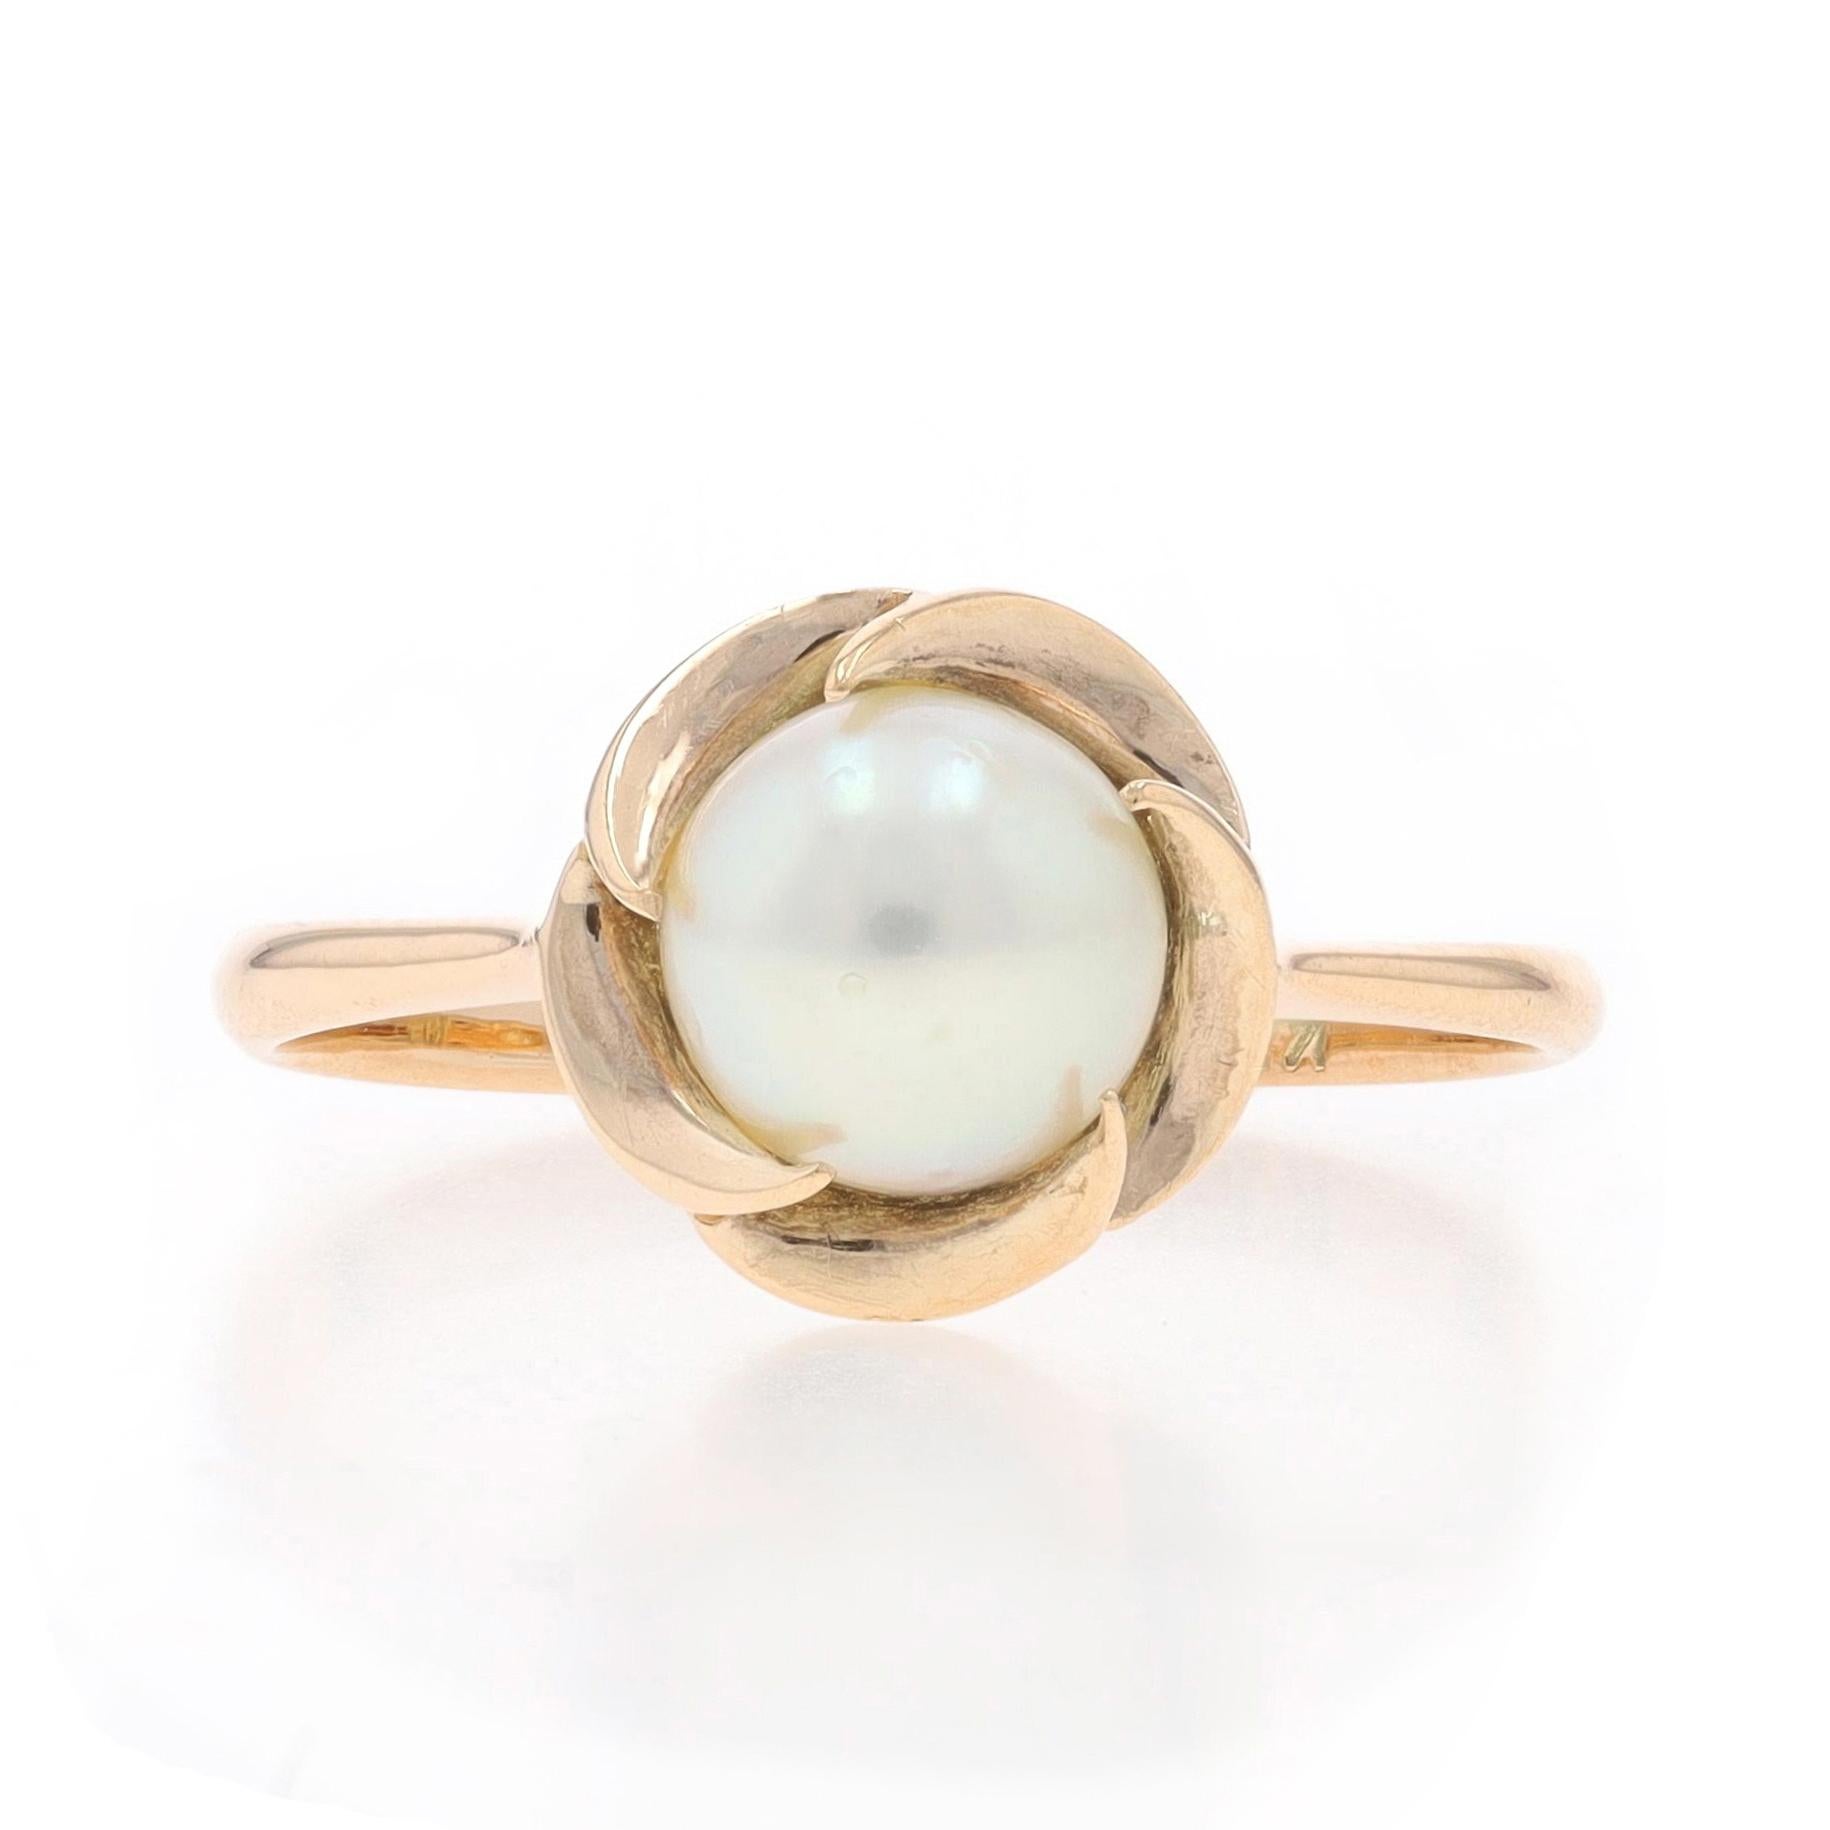 Size: 6 1/4
Sizing Fee: Up 3 sizes for $30 or Down 2 sizes for $30

Metal Content: 14k Yellow Gold

Stone Information

Cultured Pearl
Size: 6.6mm

Style: Solitaire
Theme: Floral Swirl

Measurements

Face Height (north to south): 13/32